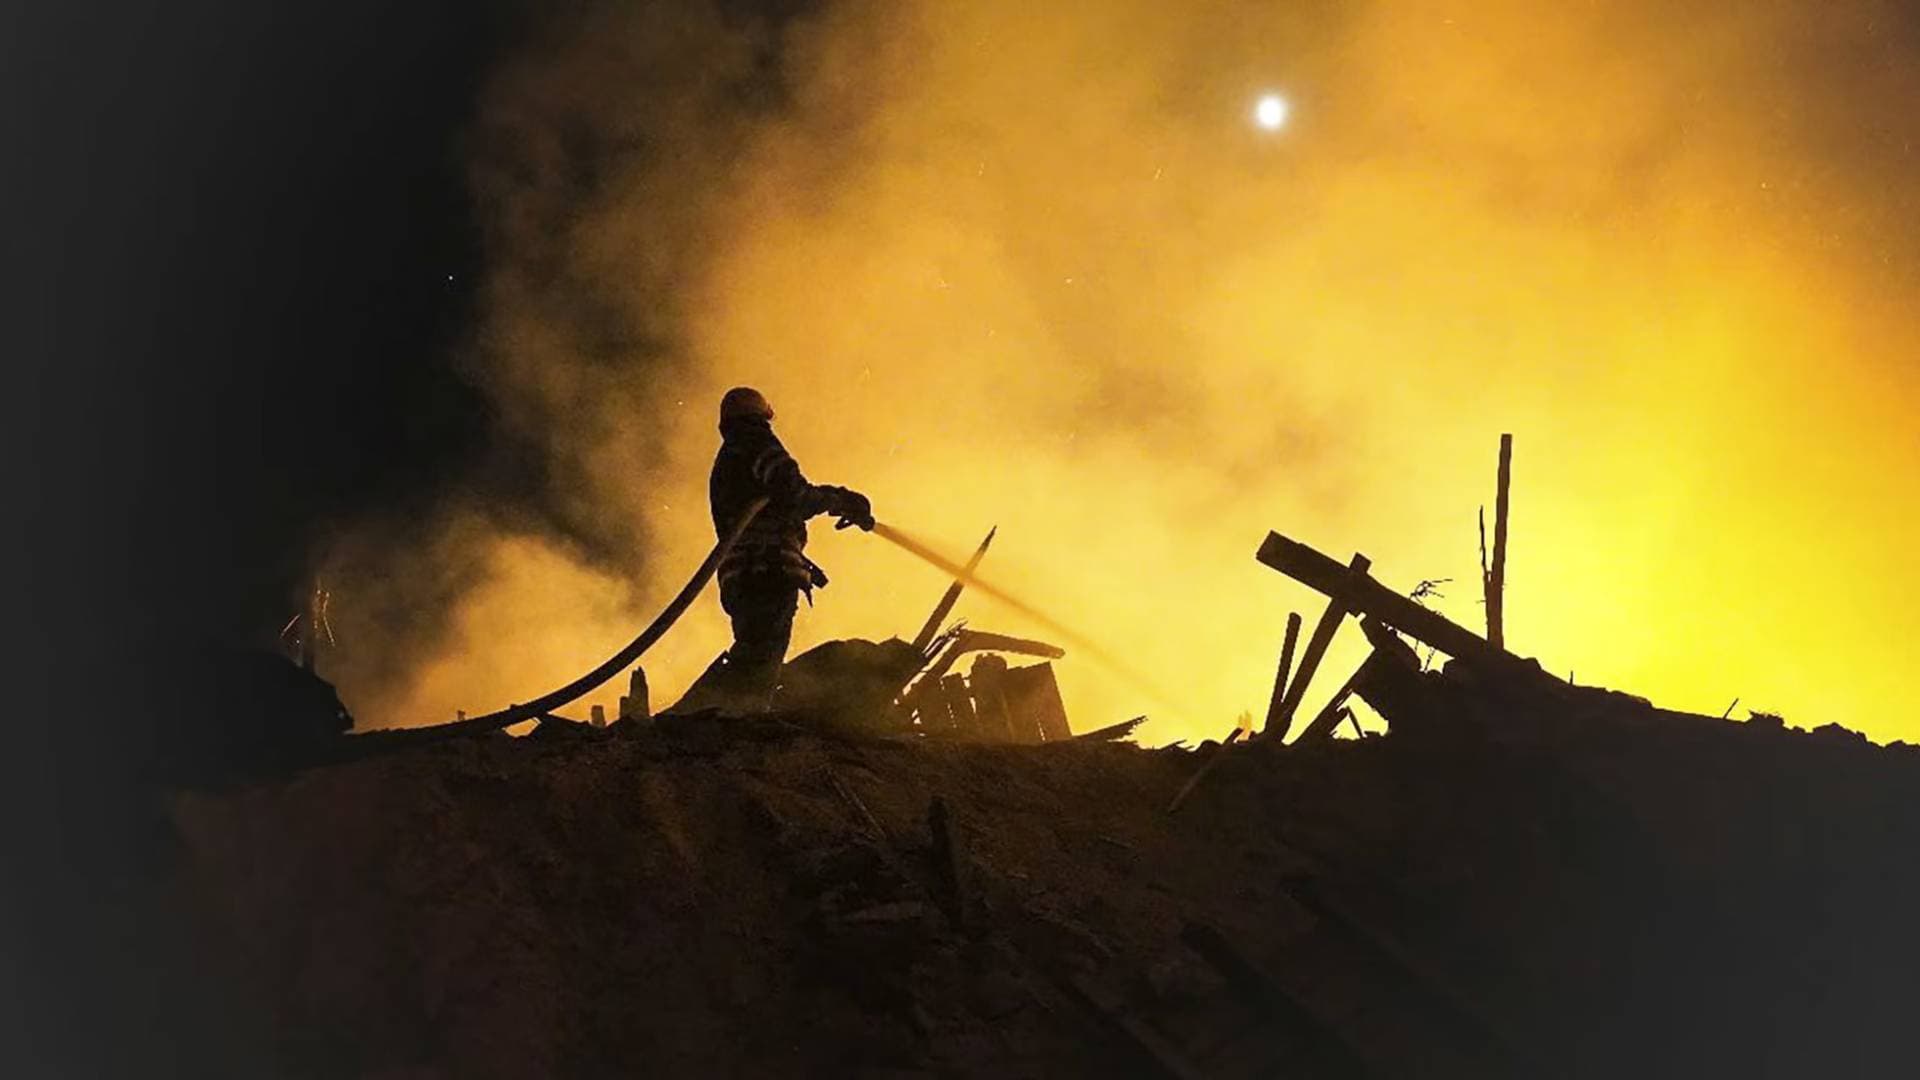 A firefighter extinguishes a fire in the aftermath of an attack given as Starokostiantyniv